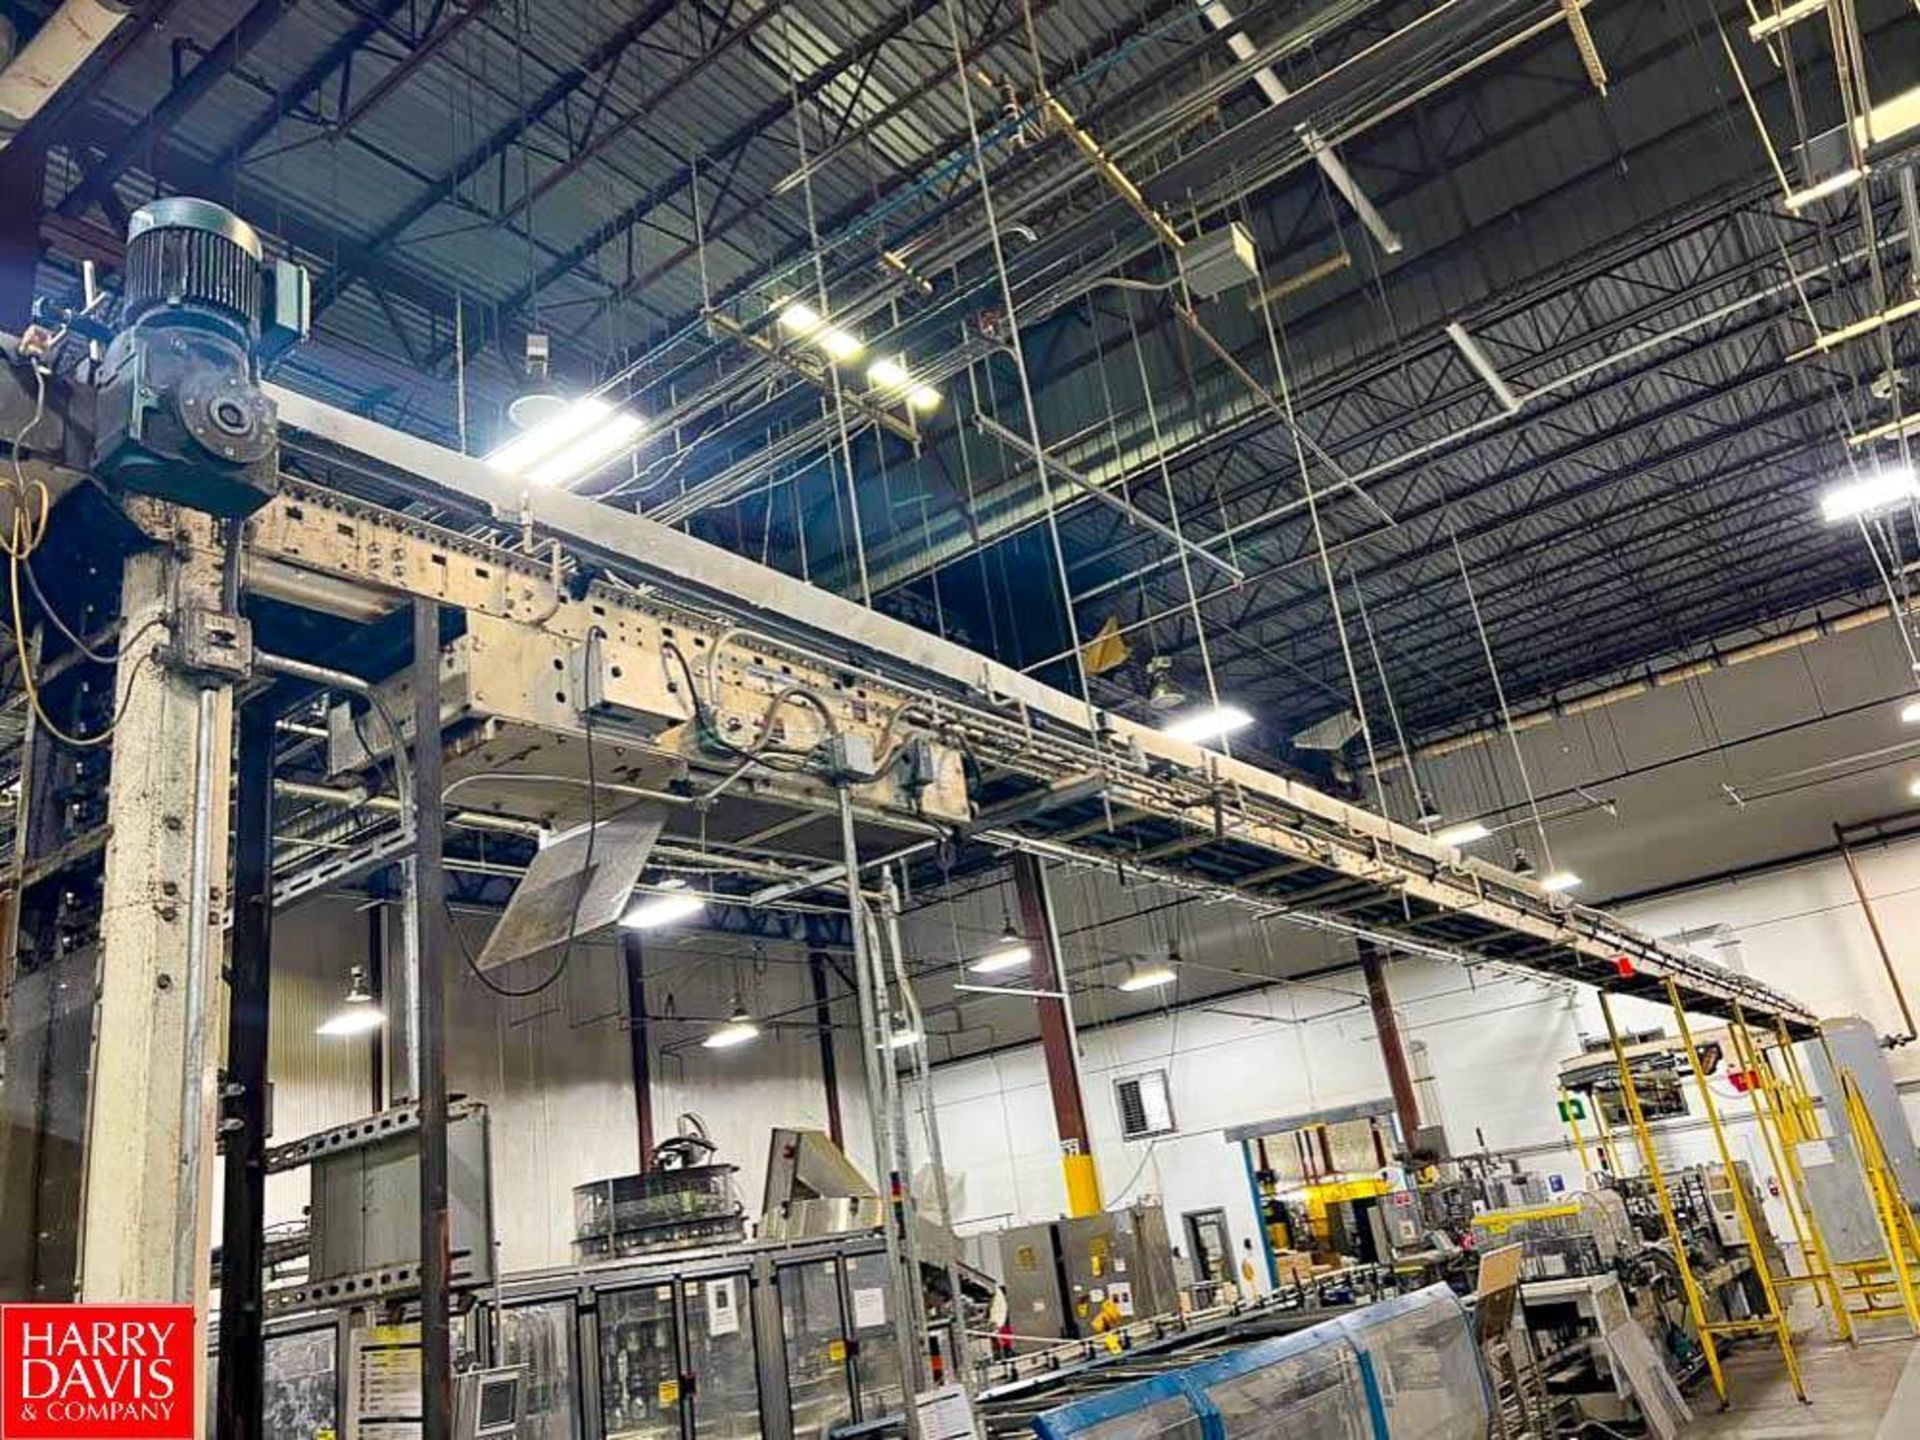 Overhead Serpentine Case Conveyor, Dimensions = 134' (Ends At Palletizer) - Rigging Fee: $2,000